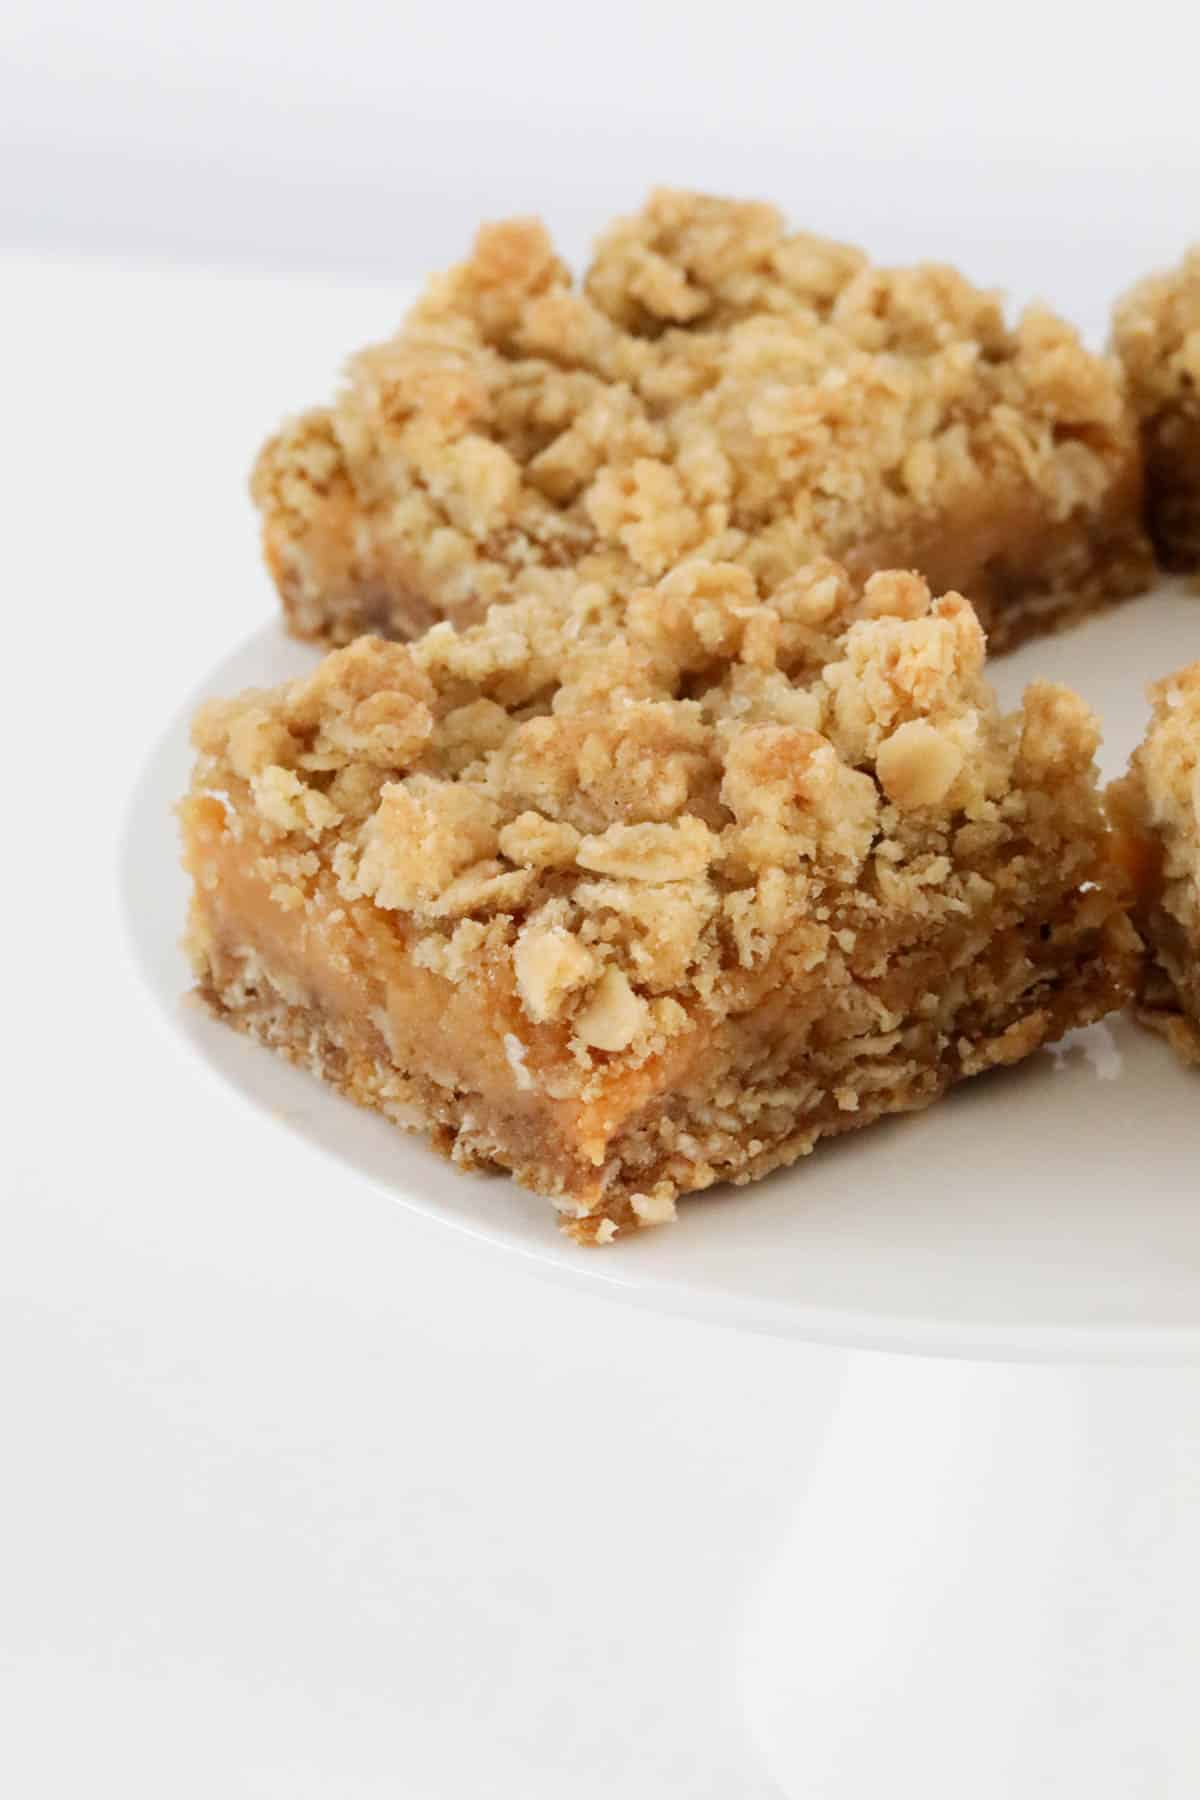 Squares of an oat crumble with caramel filling.